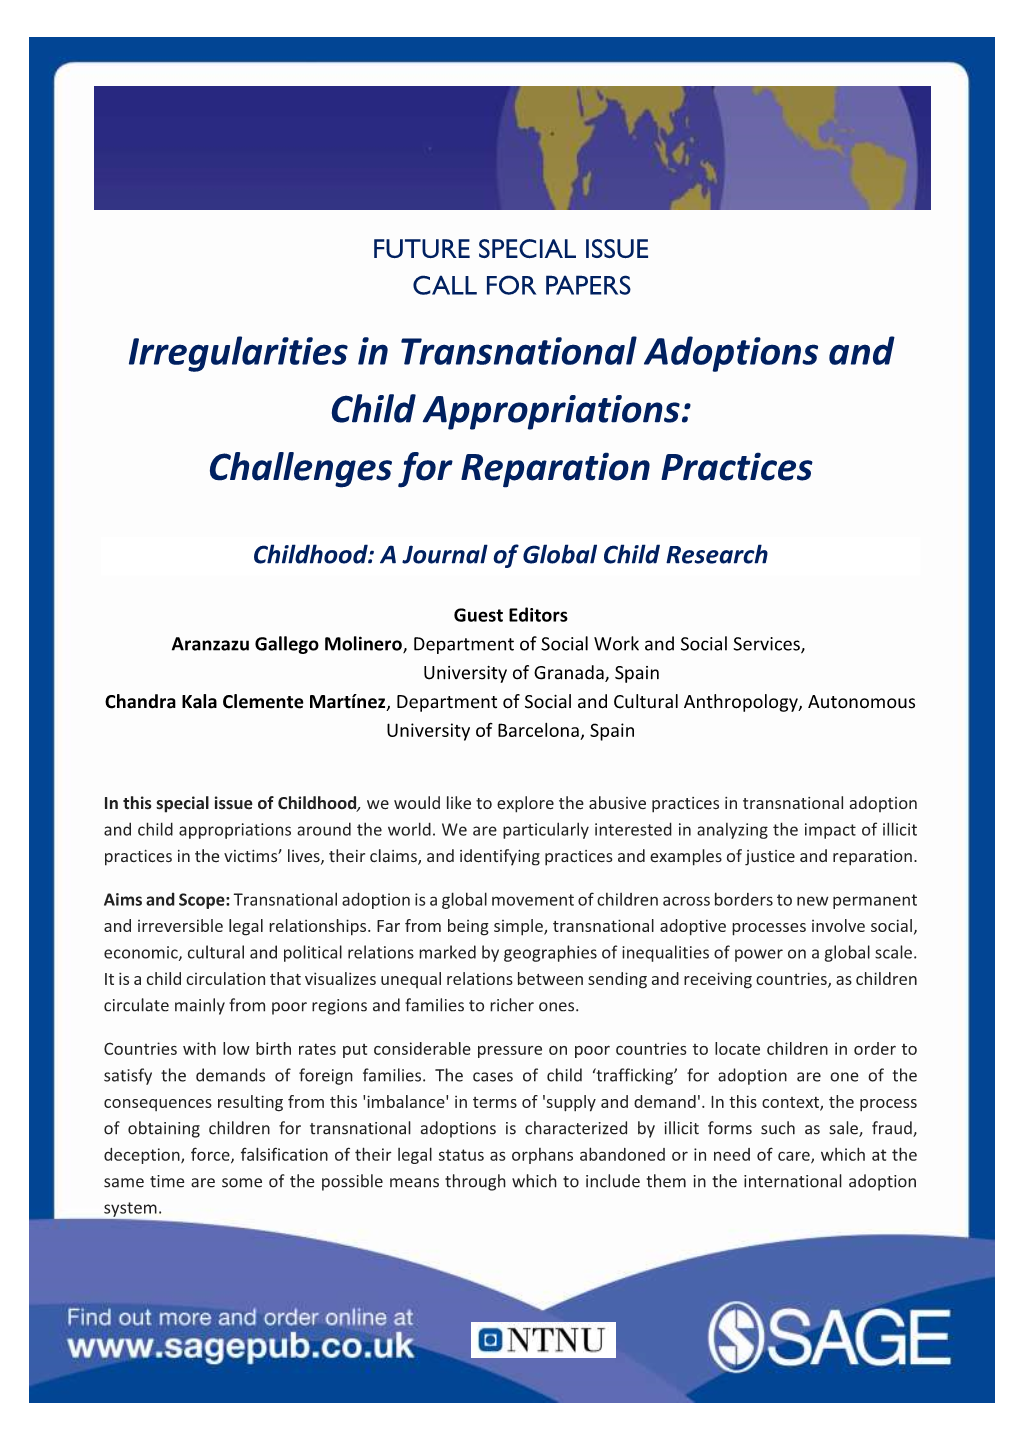 Irregularities in Transnational Adoptions and Child Appropriations: Challenges for Reparation Practices